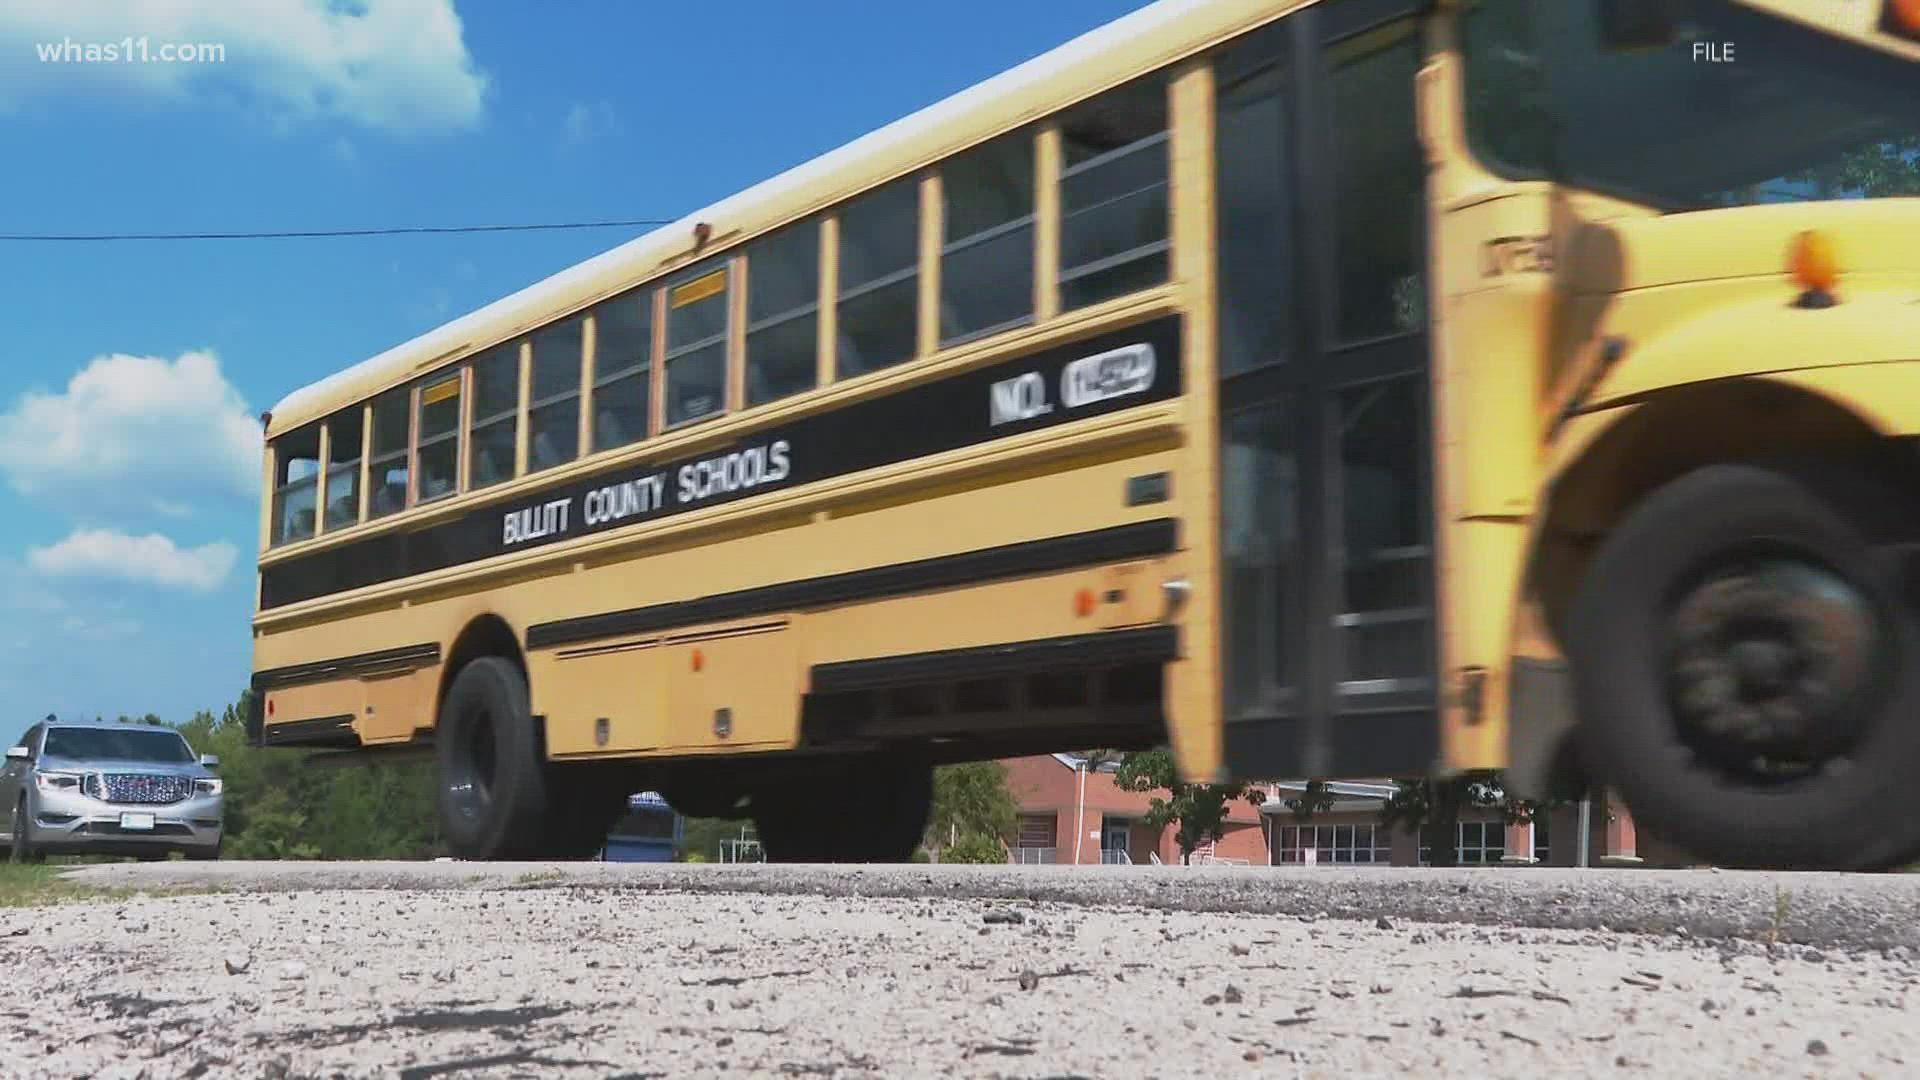 Some current bus drivers who spoke at Tuesday's board meeting said the incentives are not enough to keep them on the job.